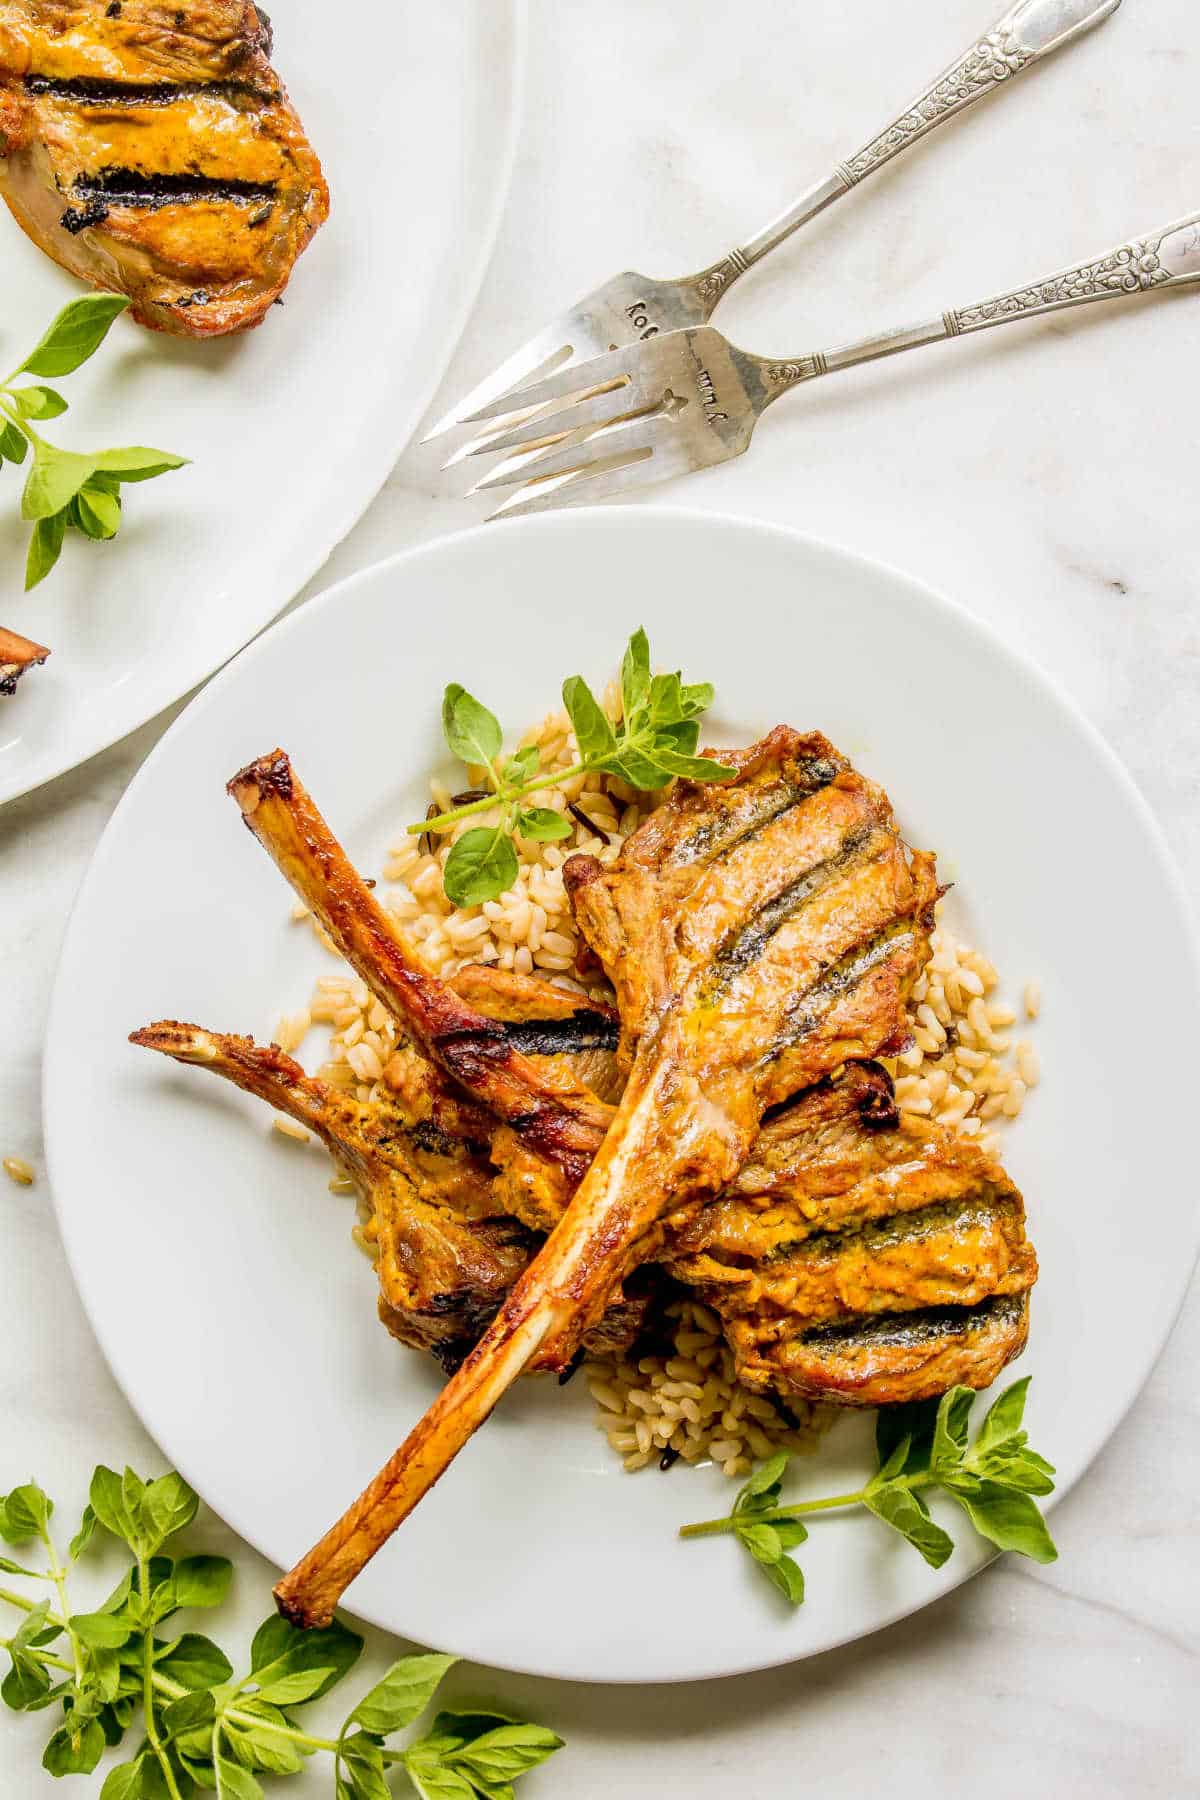 Grilled Lamb Chops in a Curry Marinade on a bed of brown rice and fresh herbs